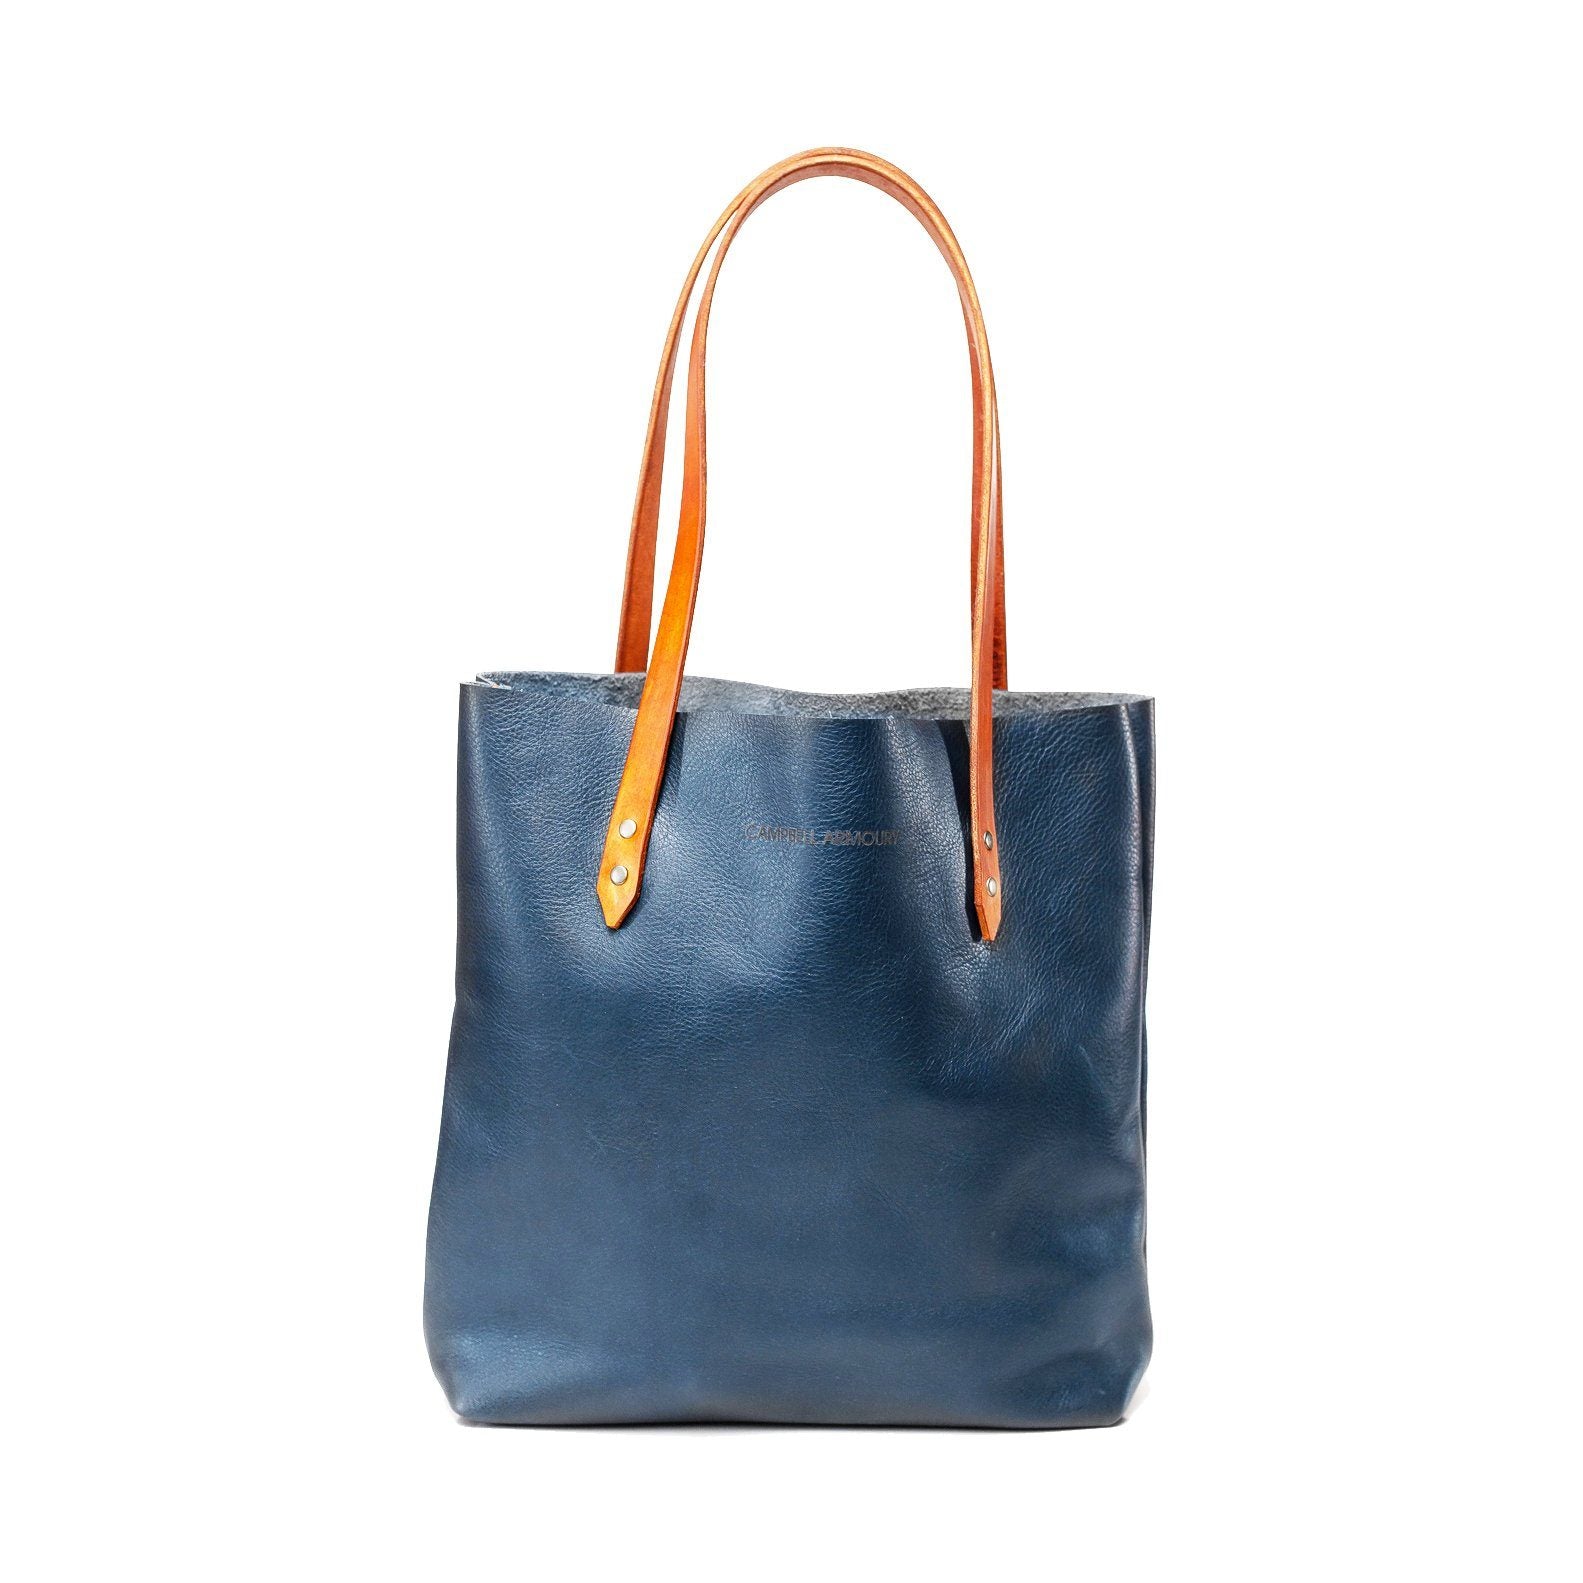 Campbell Armoury Leather Soft Tote Bag clothing & accessories Campbell Armoury navy